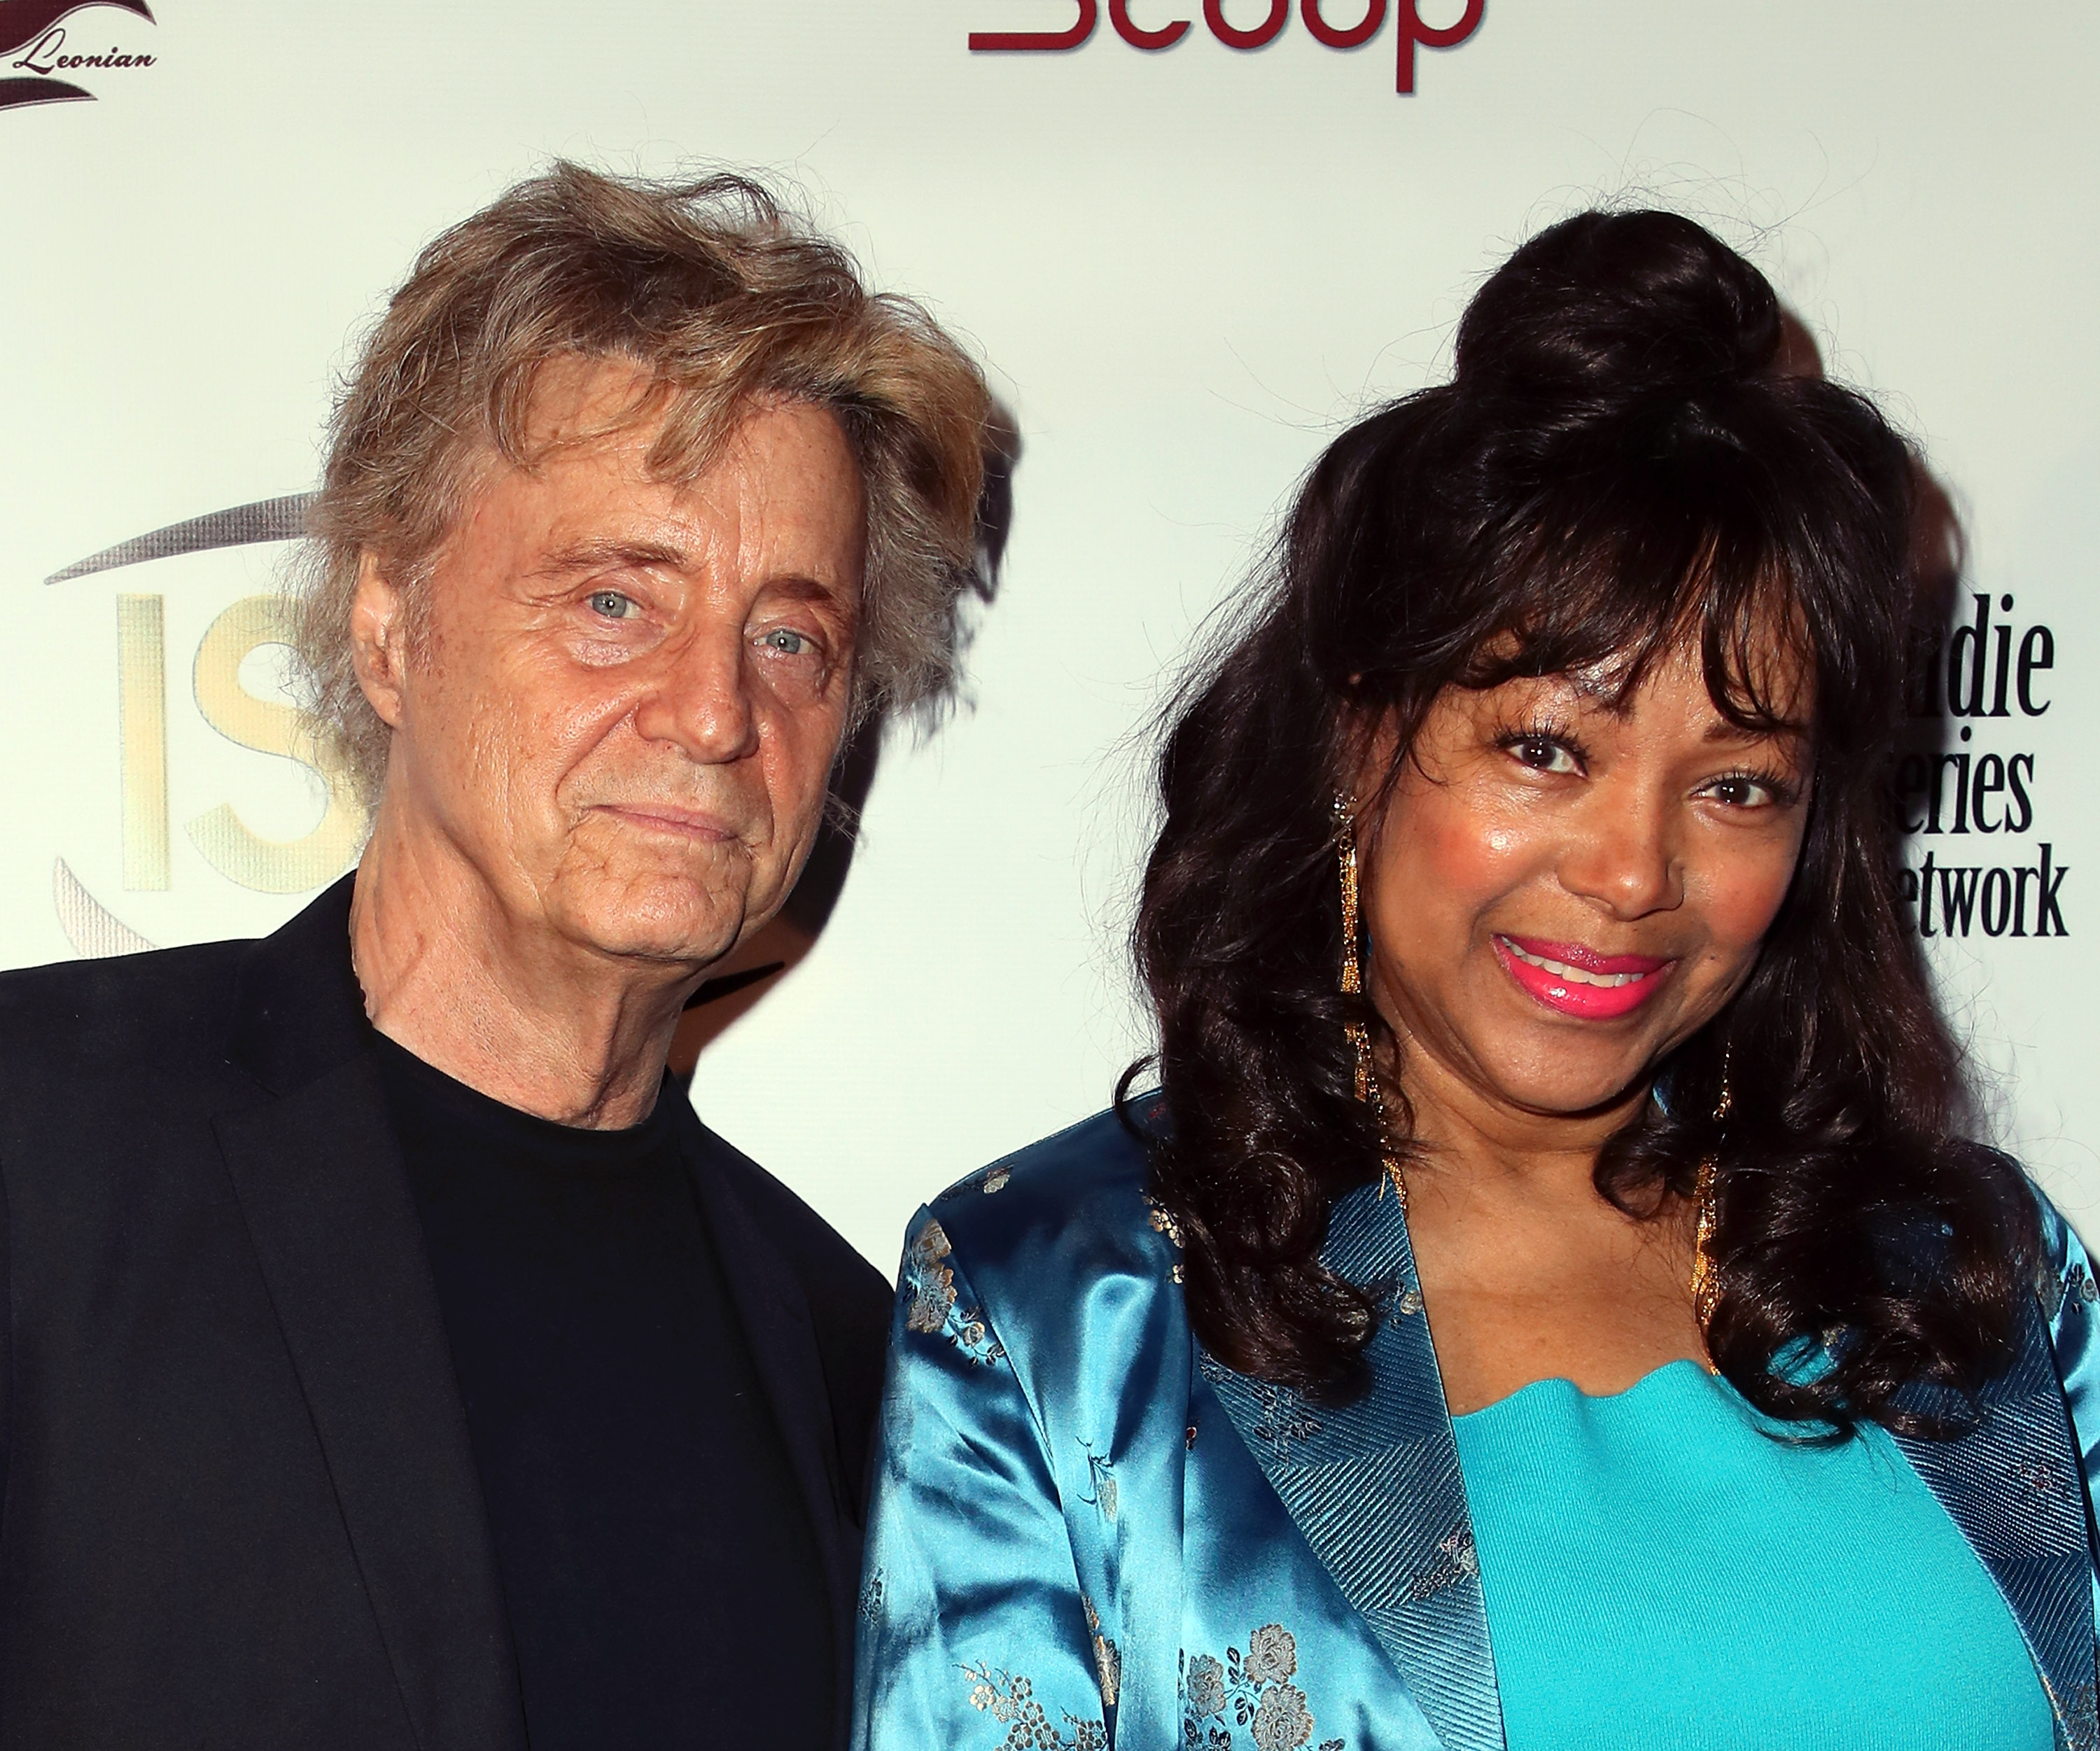 Radio host Shadoe Stevens (L) and Beverly Stevens at The Colony Theatre on April 4, 2018, in Burbank, California. | Source: Getty Images